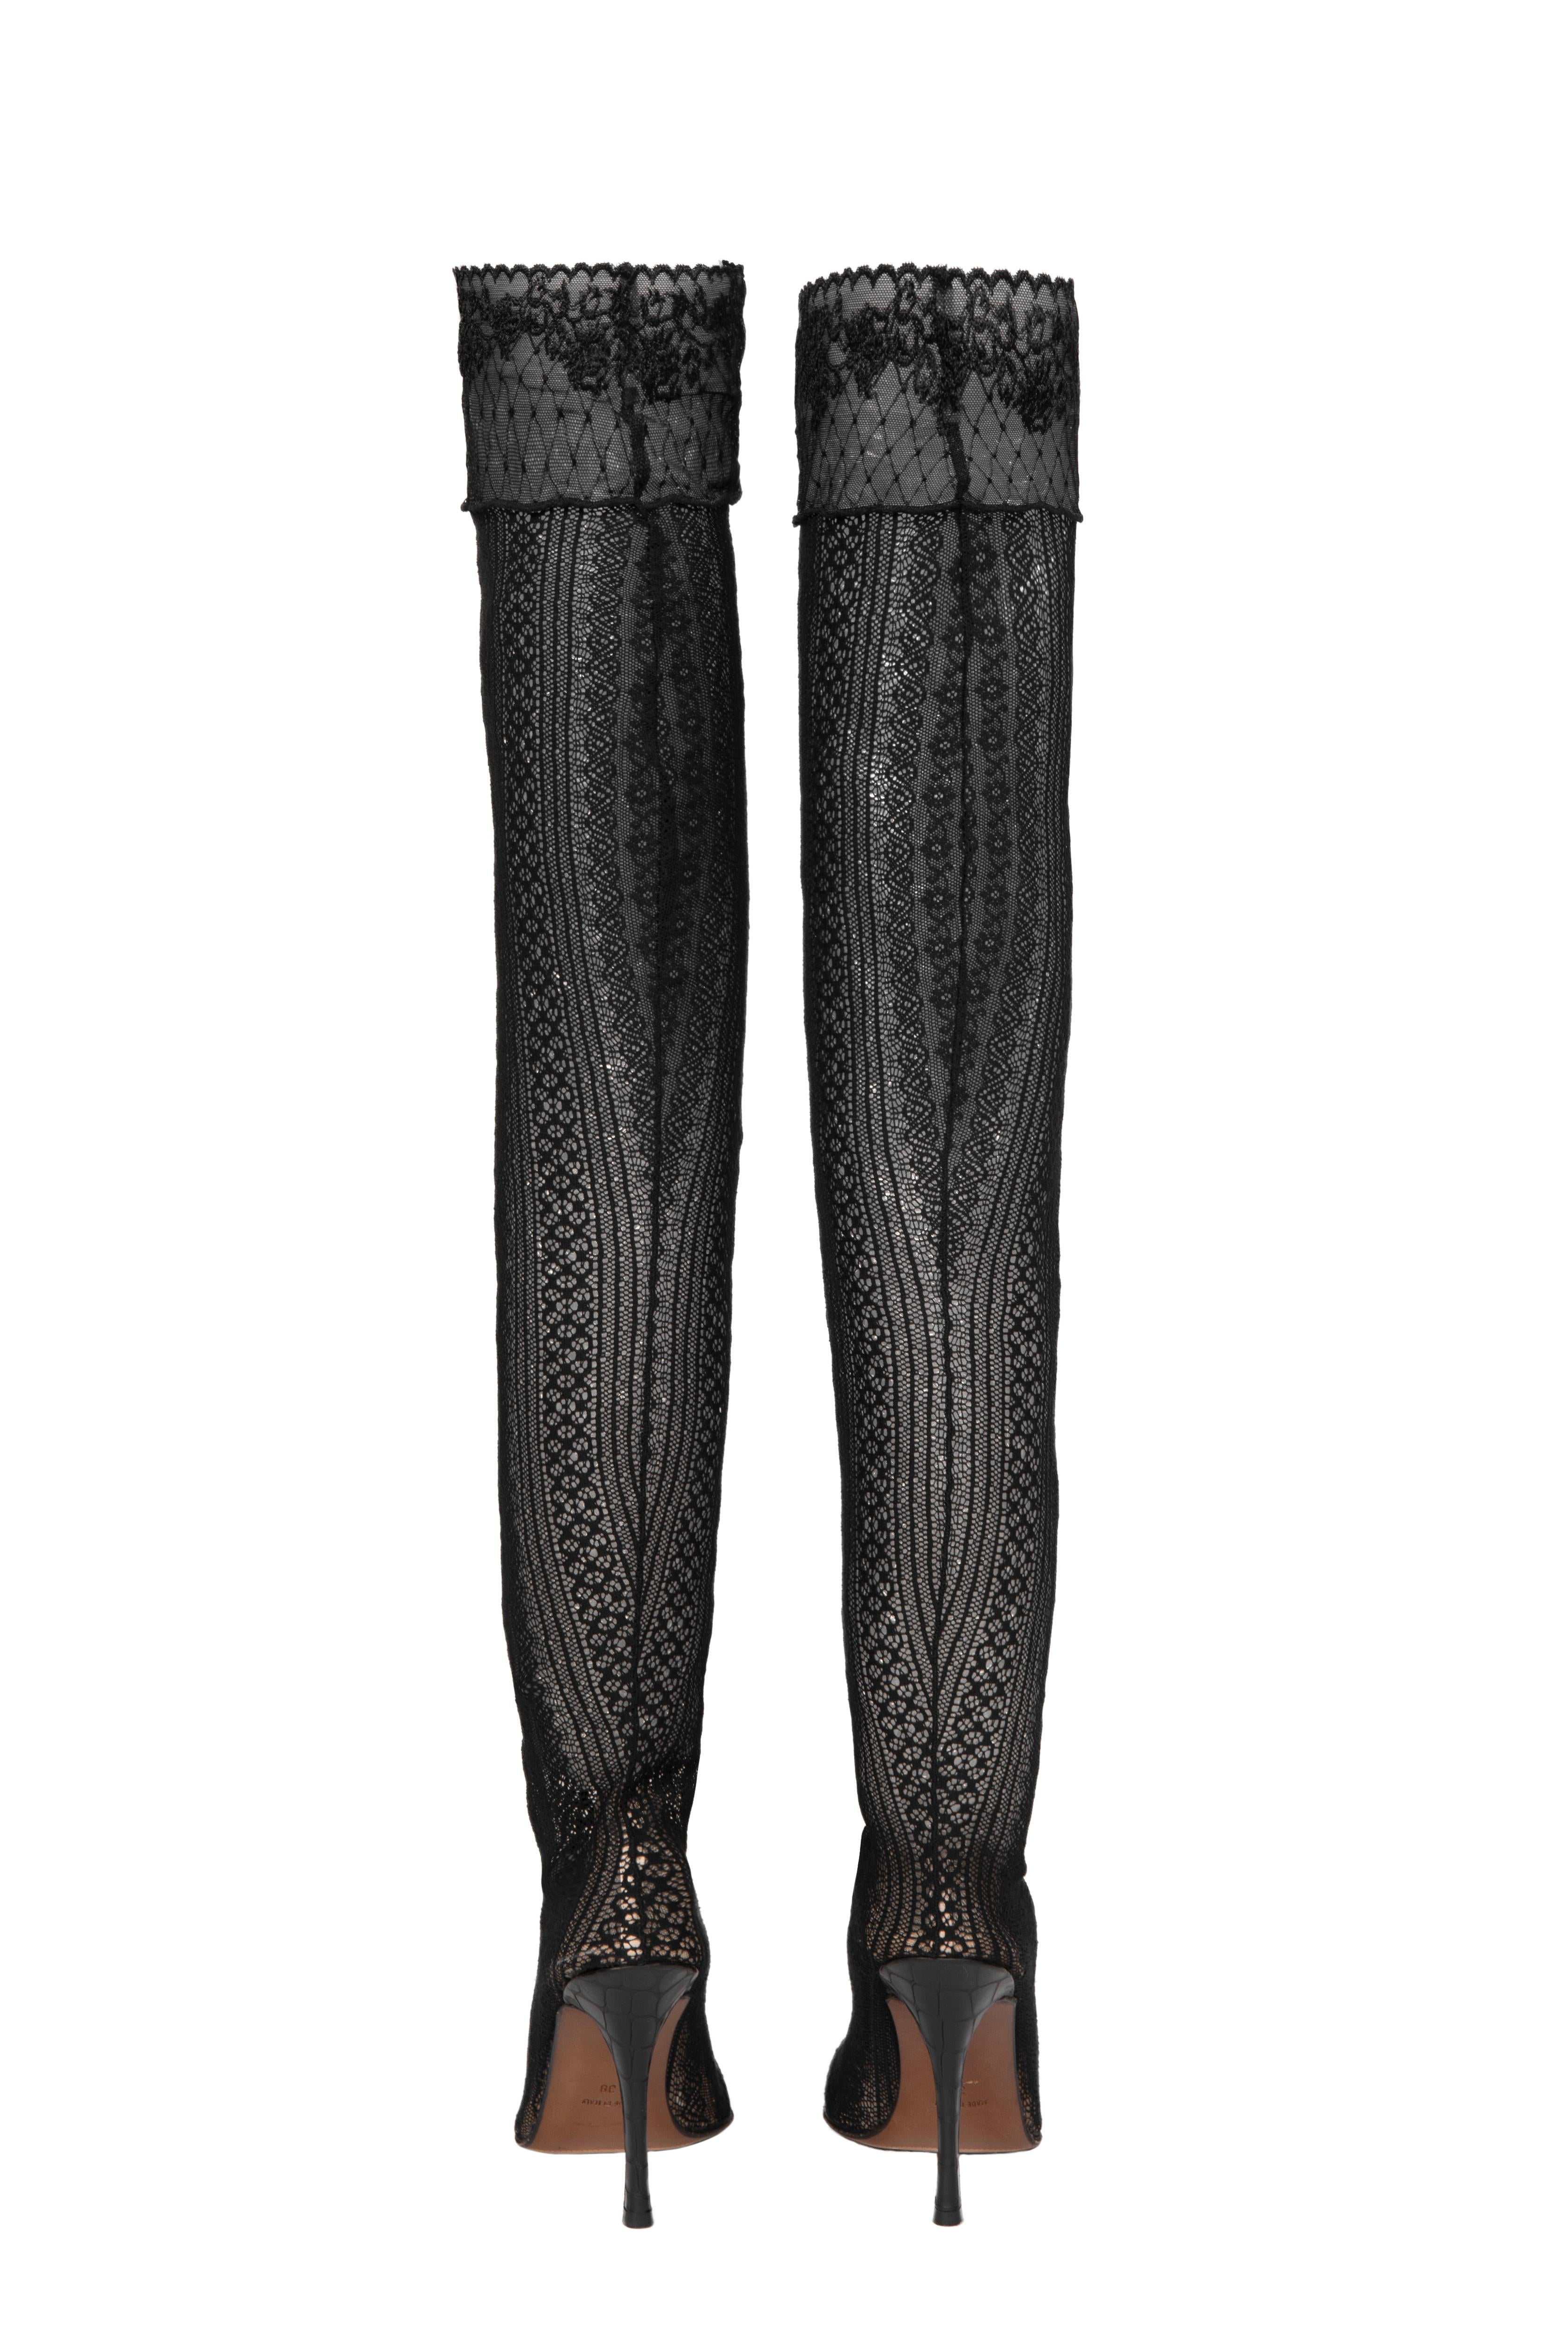 S/S 1998 John Galliano for CHRISTIAN DIOR Black Thigh-High Lace Stocking Boots 1